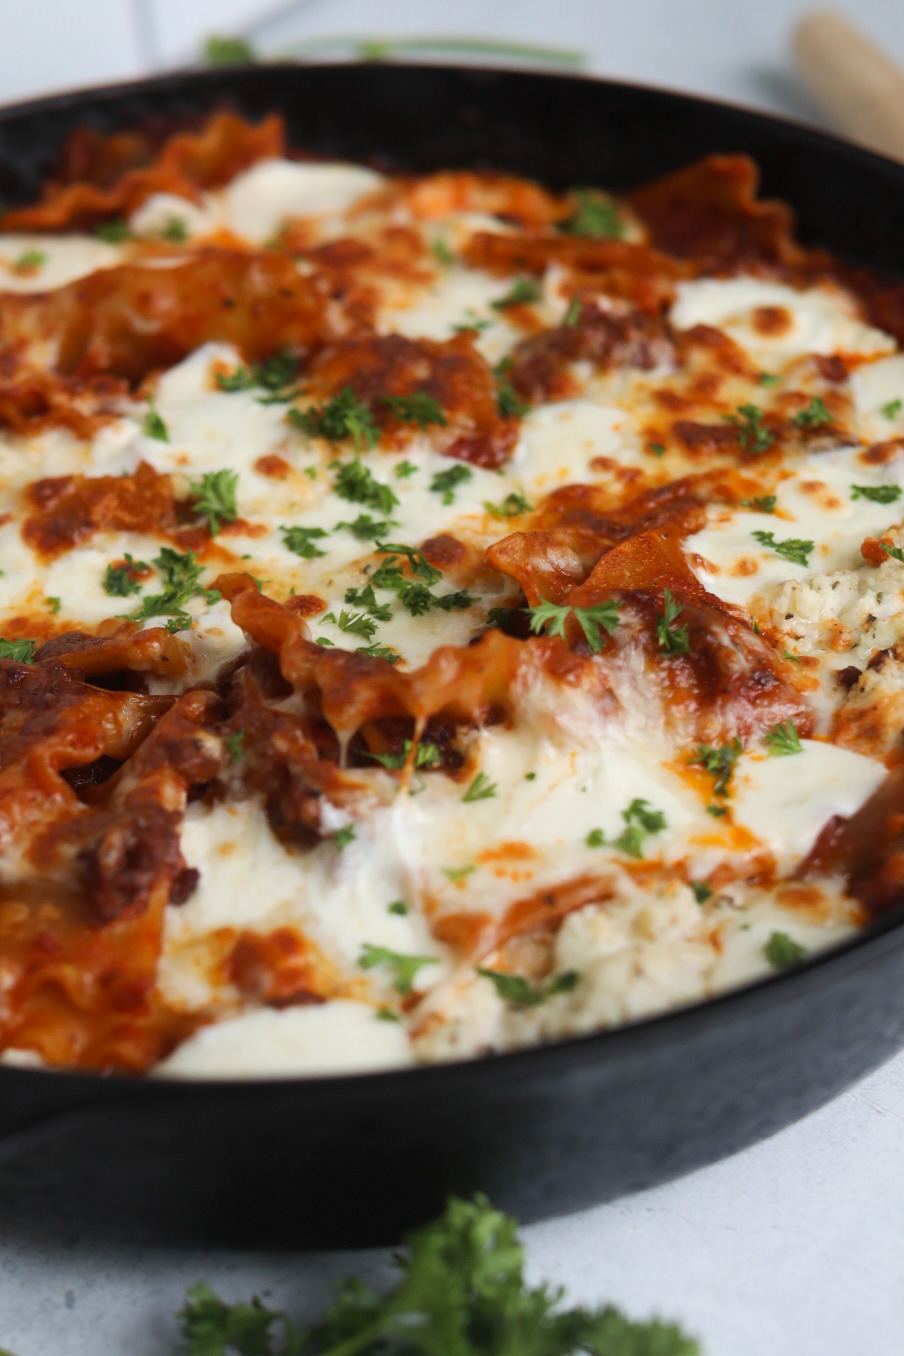 Skillet lasagna in a black cast iron skillet topped with melted mozzarella cheese, topped with fresh parsley.